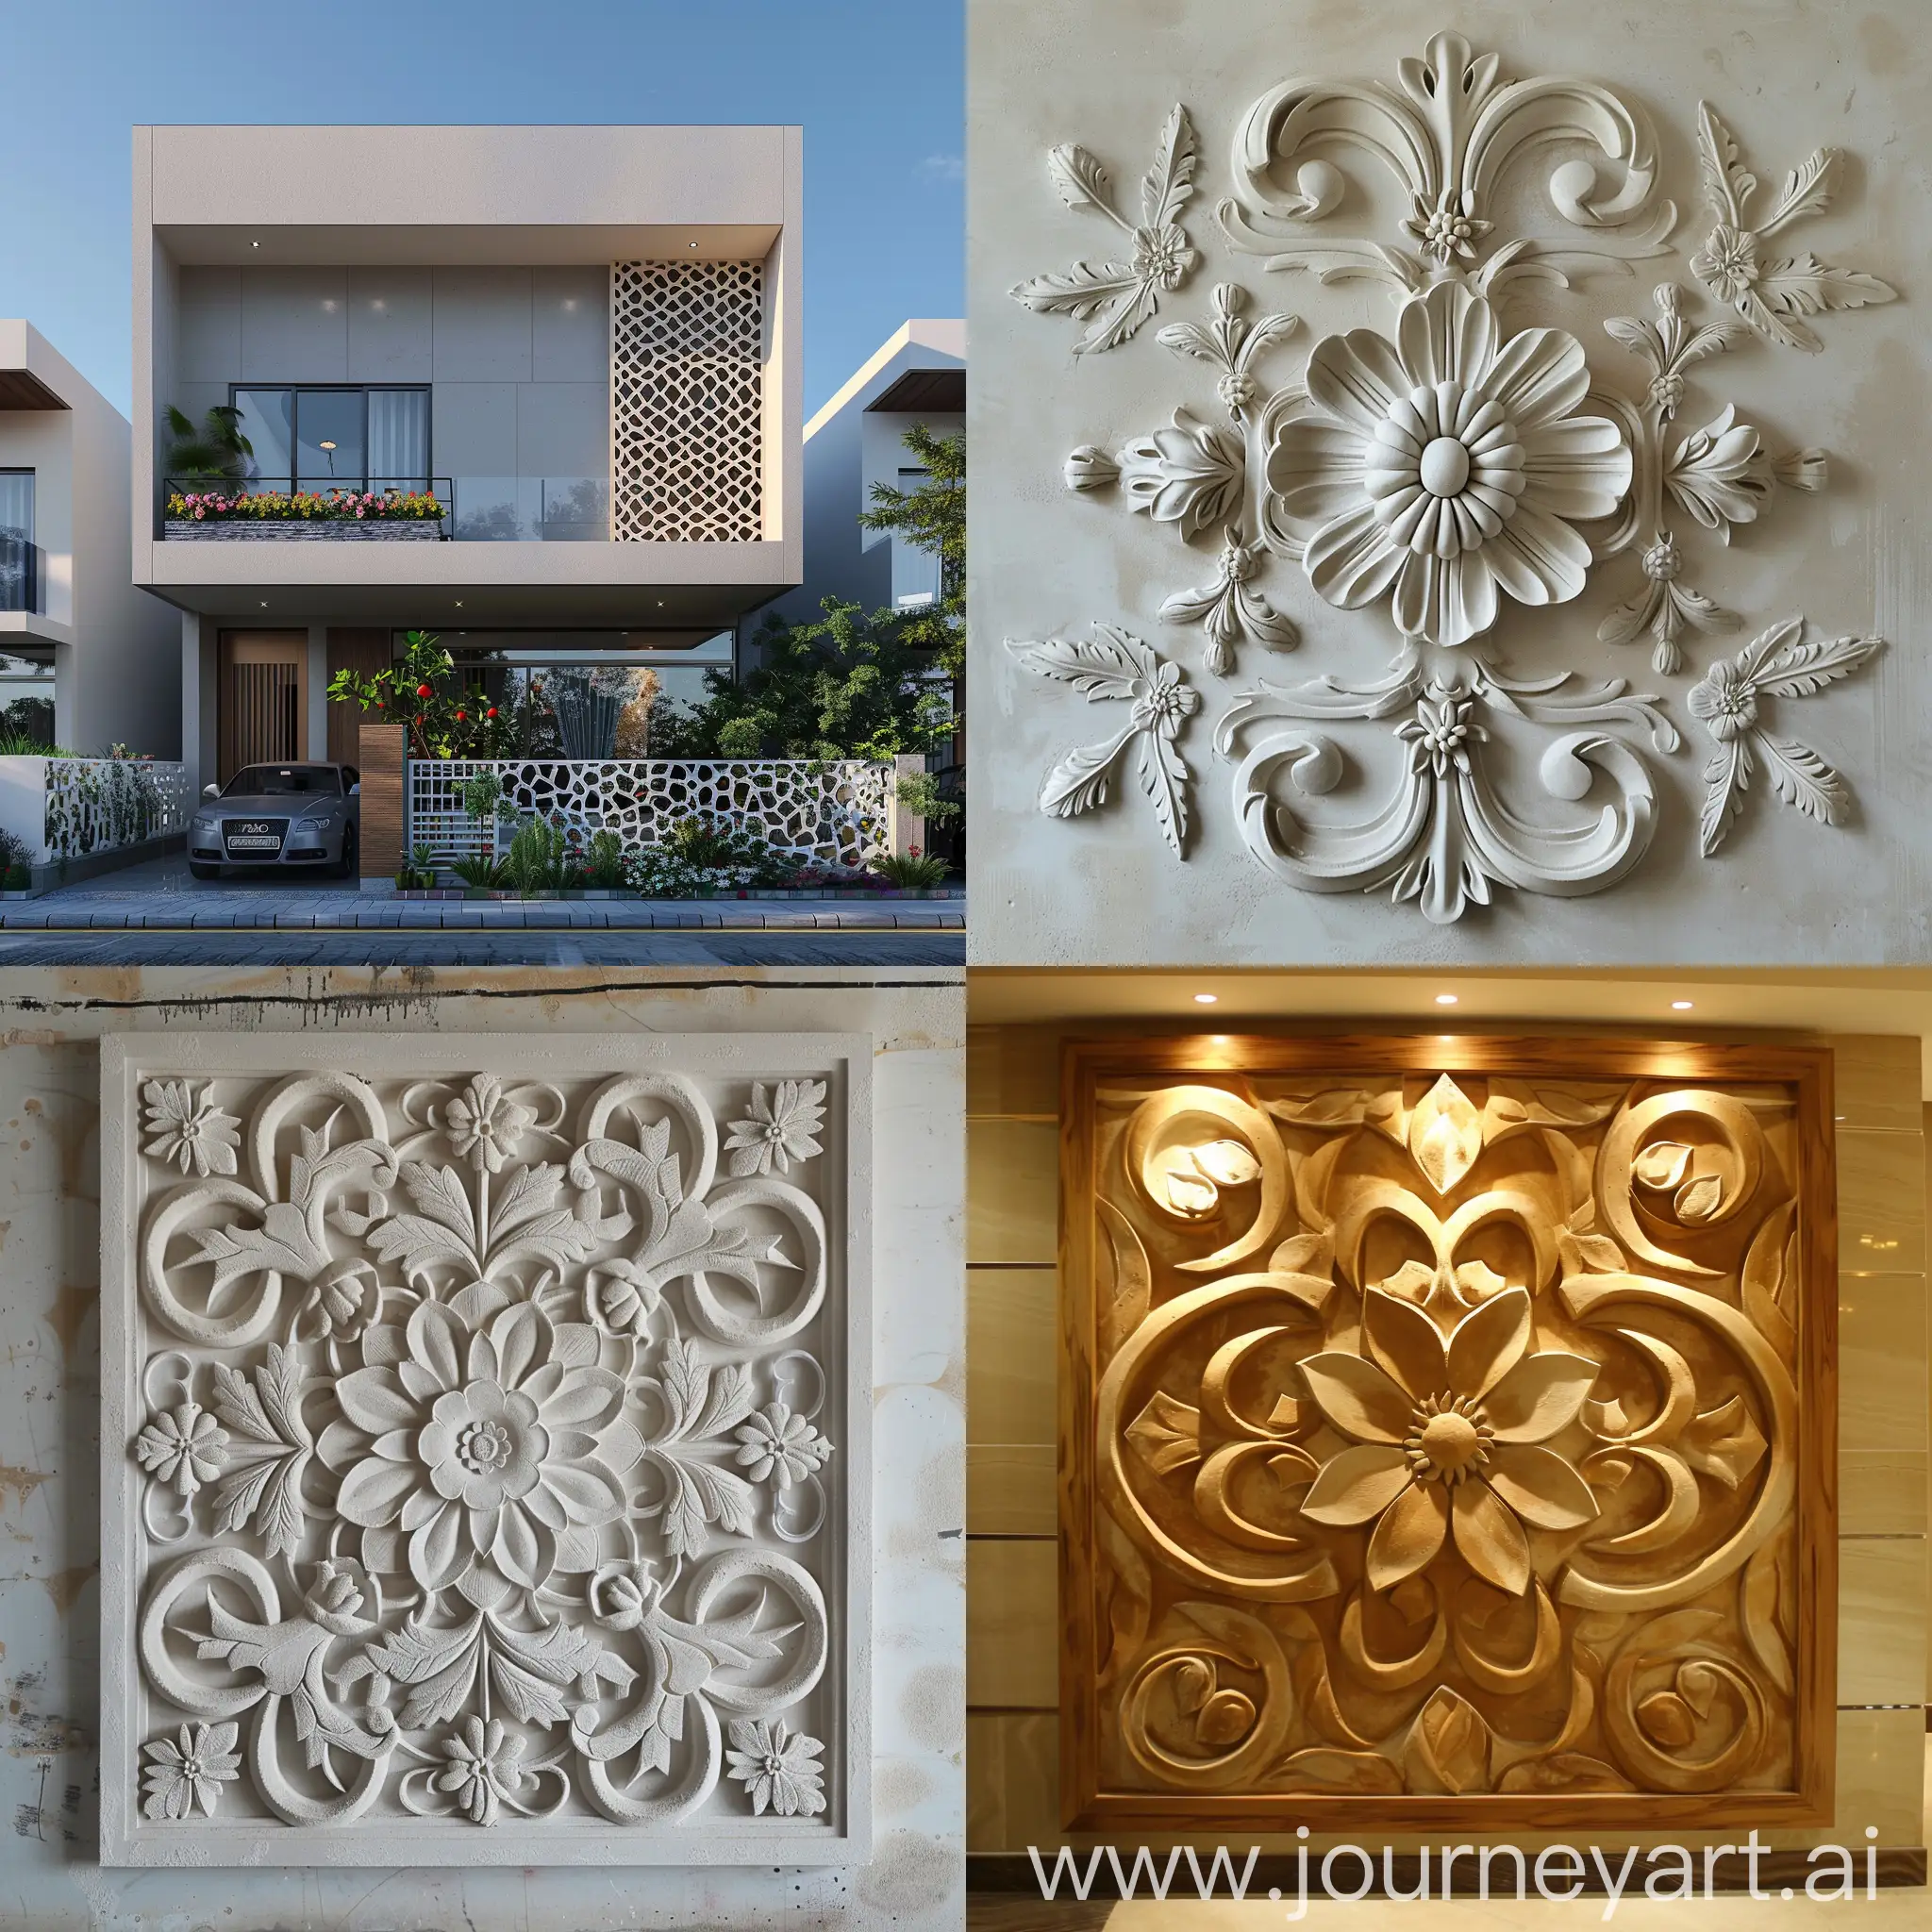 create a pattern or design for front elevation, the wall is plain, the design will be made using plaster